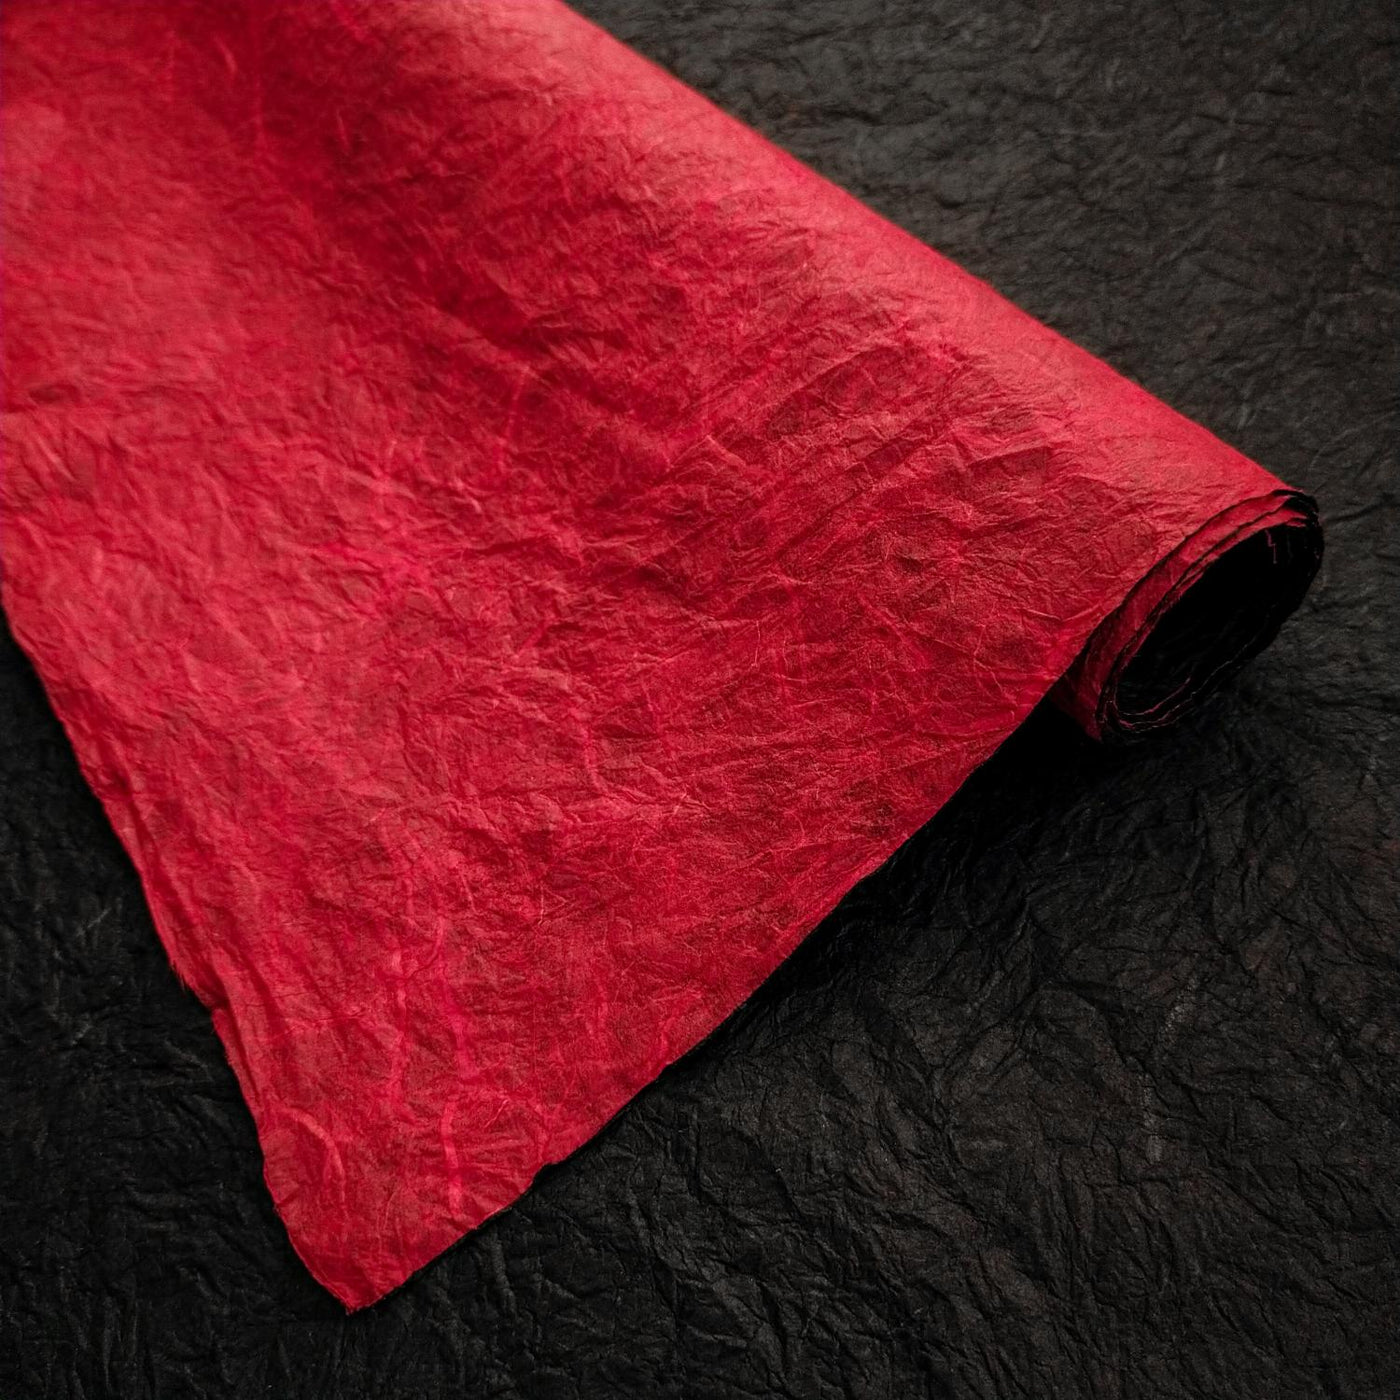 Double-sided Momigami Mulberry Paper (Black and Red)